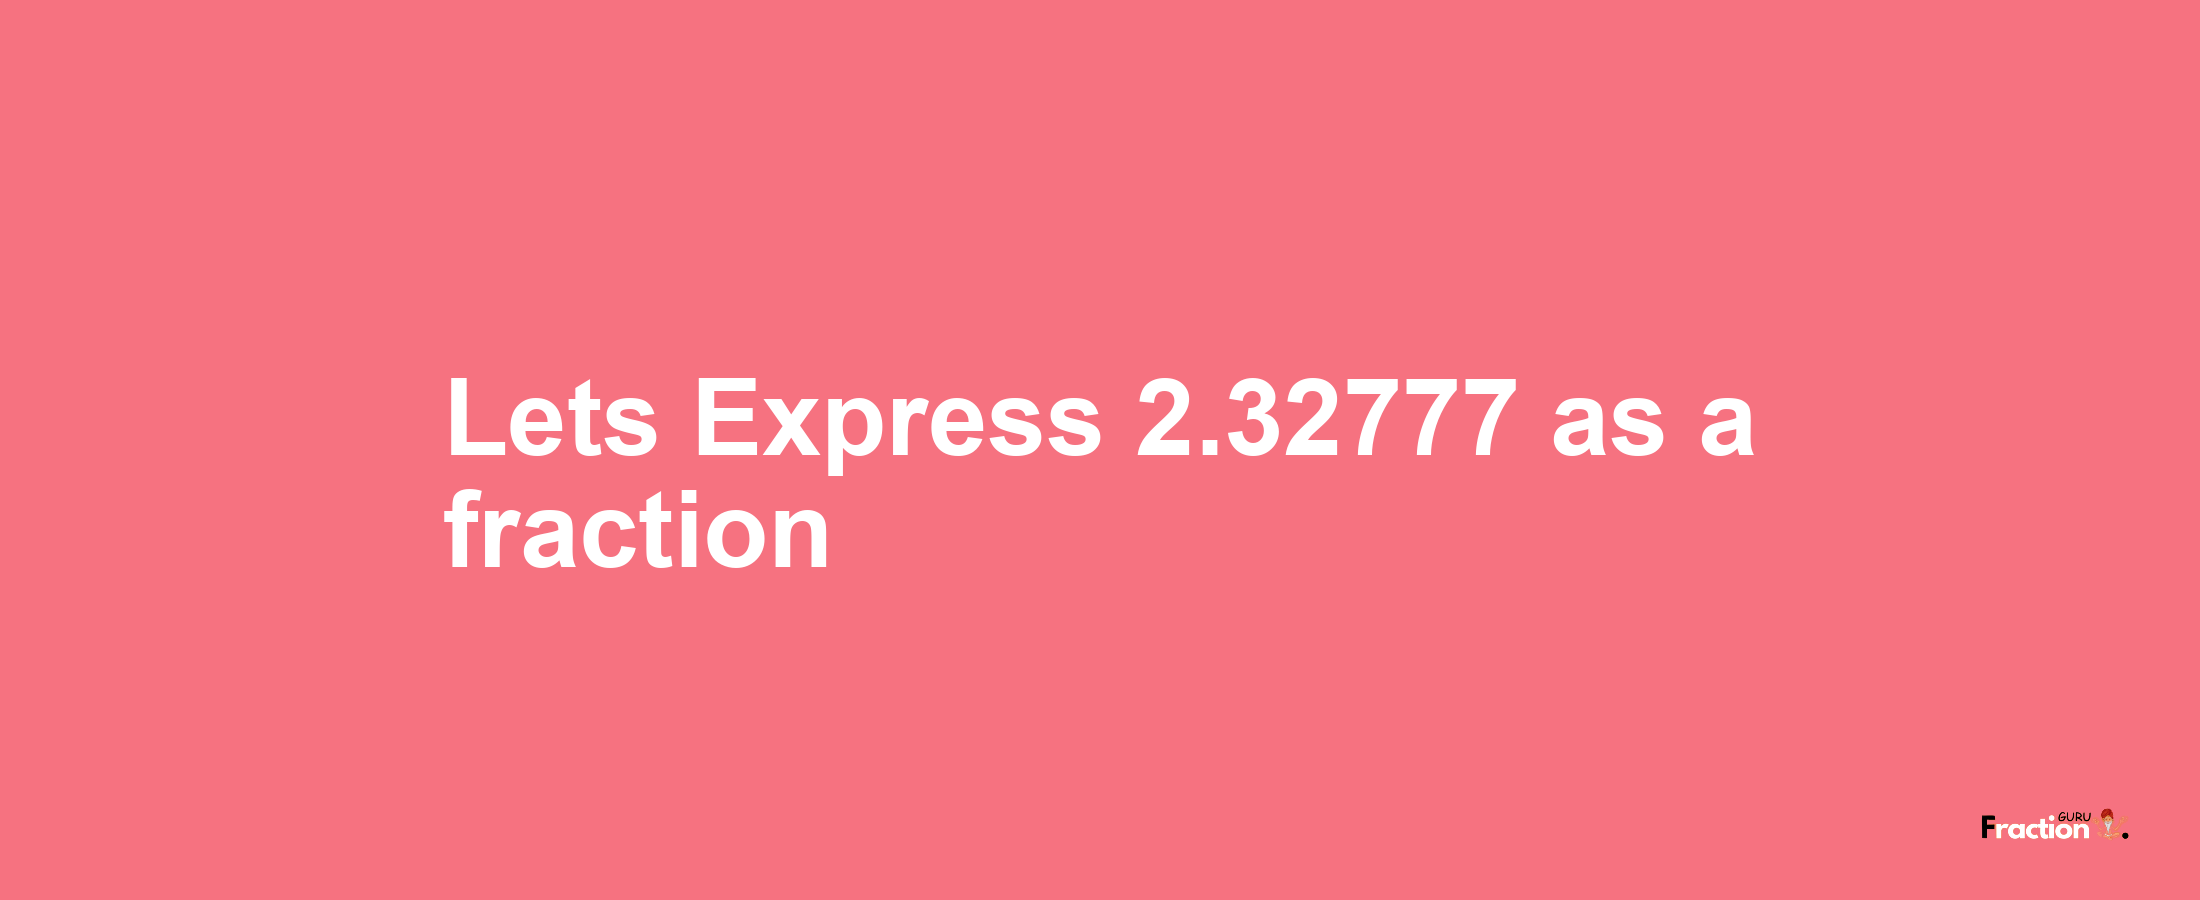 Lets Express 2.32777 as afraction